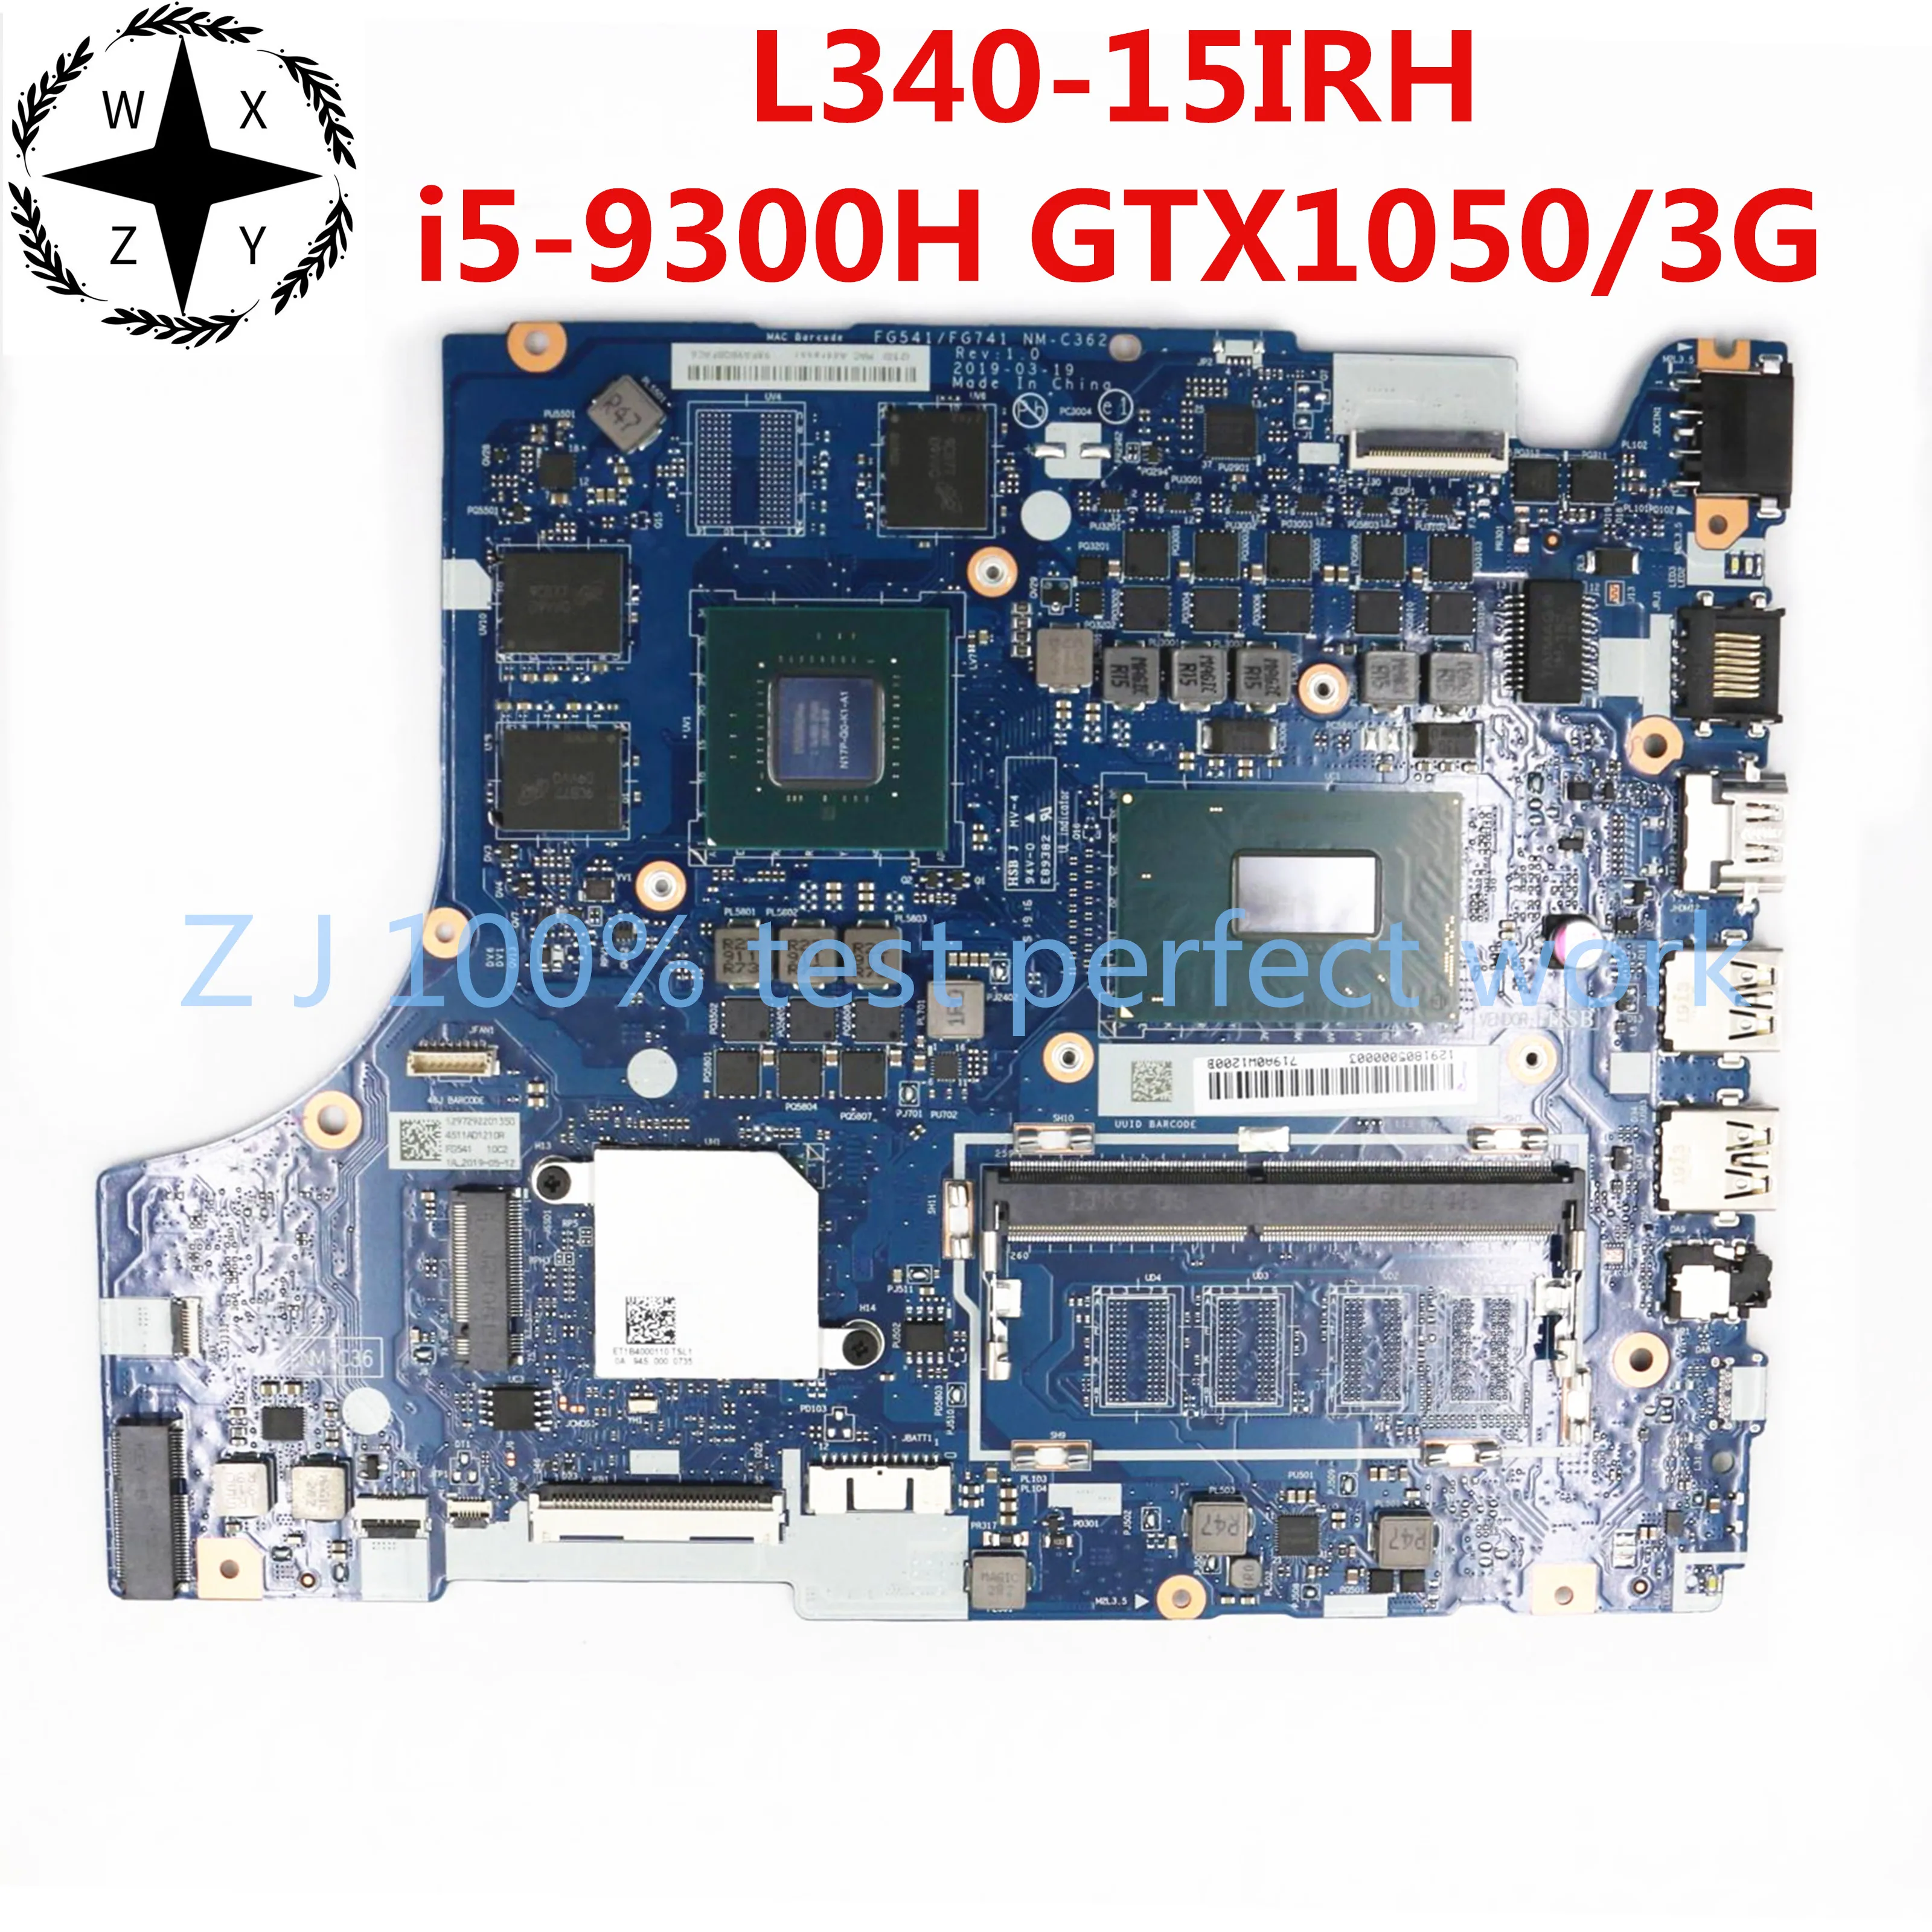 Original For Lenovo L340 15irh Laptop Motherboard With i5 9300H GTX1050/3G  5B20S42311 NM C362 MB 100% Tested Fast Ship|Laptop Motherboard| - AliExpress